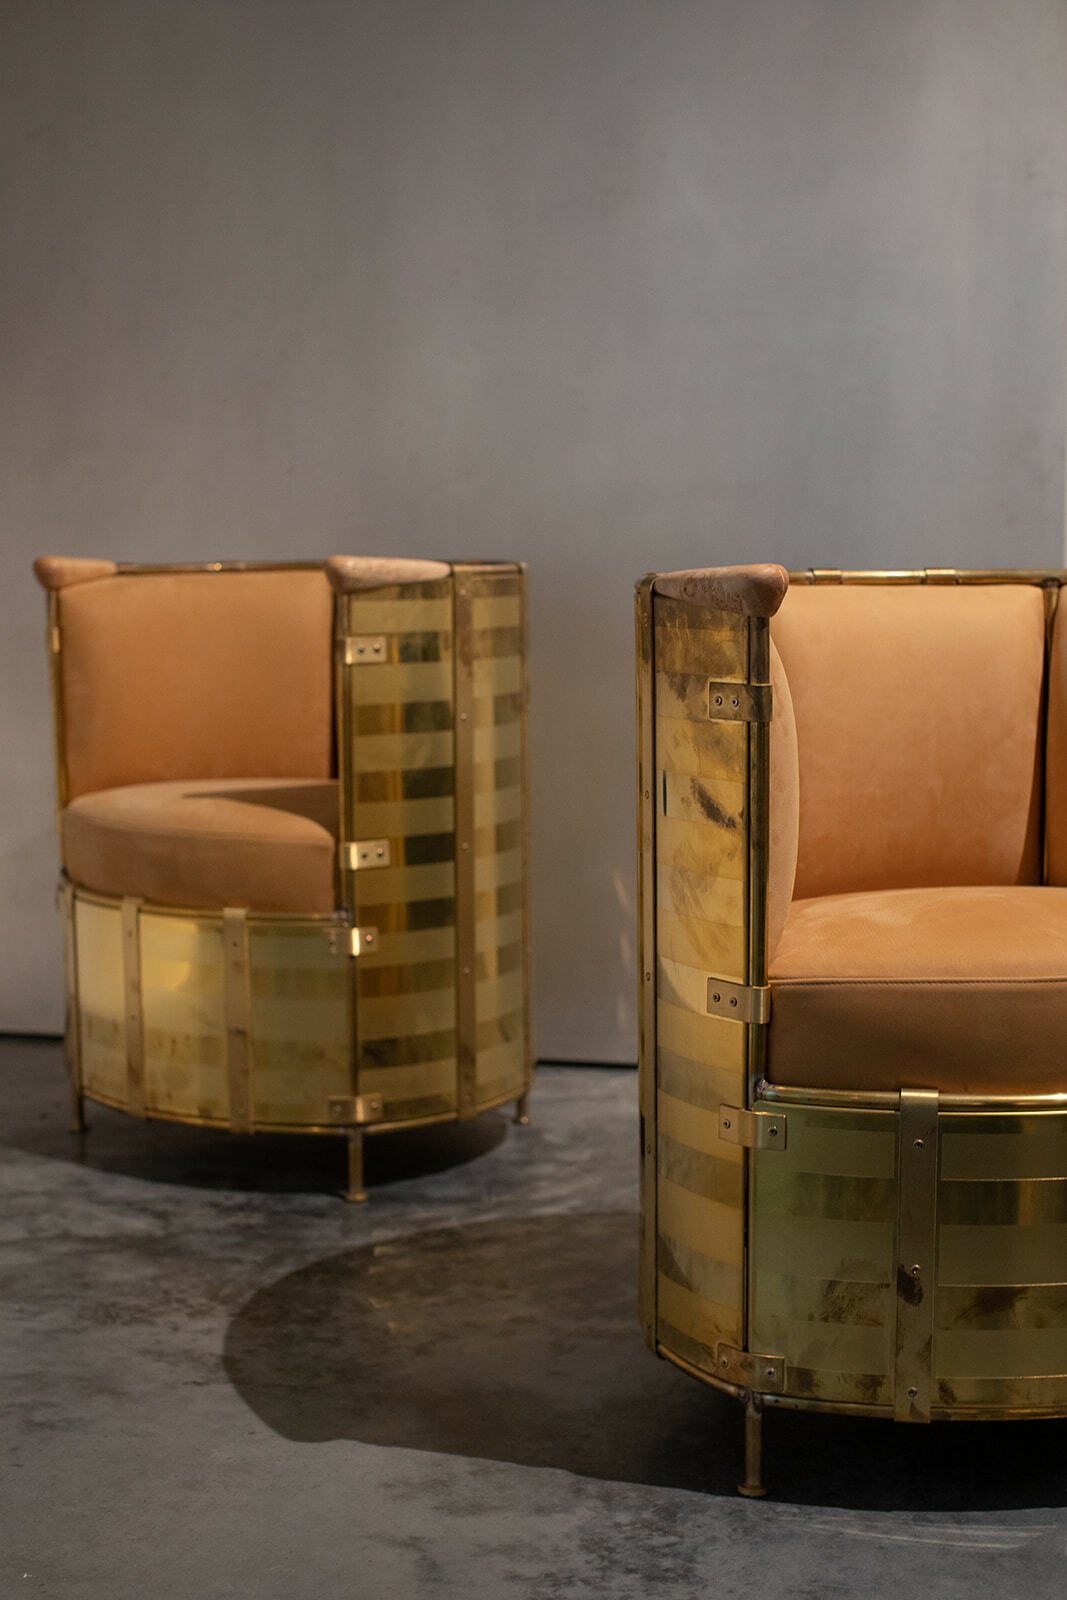 Pair of 'El Dorado' chairs by Mats Theselius